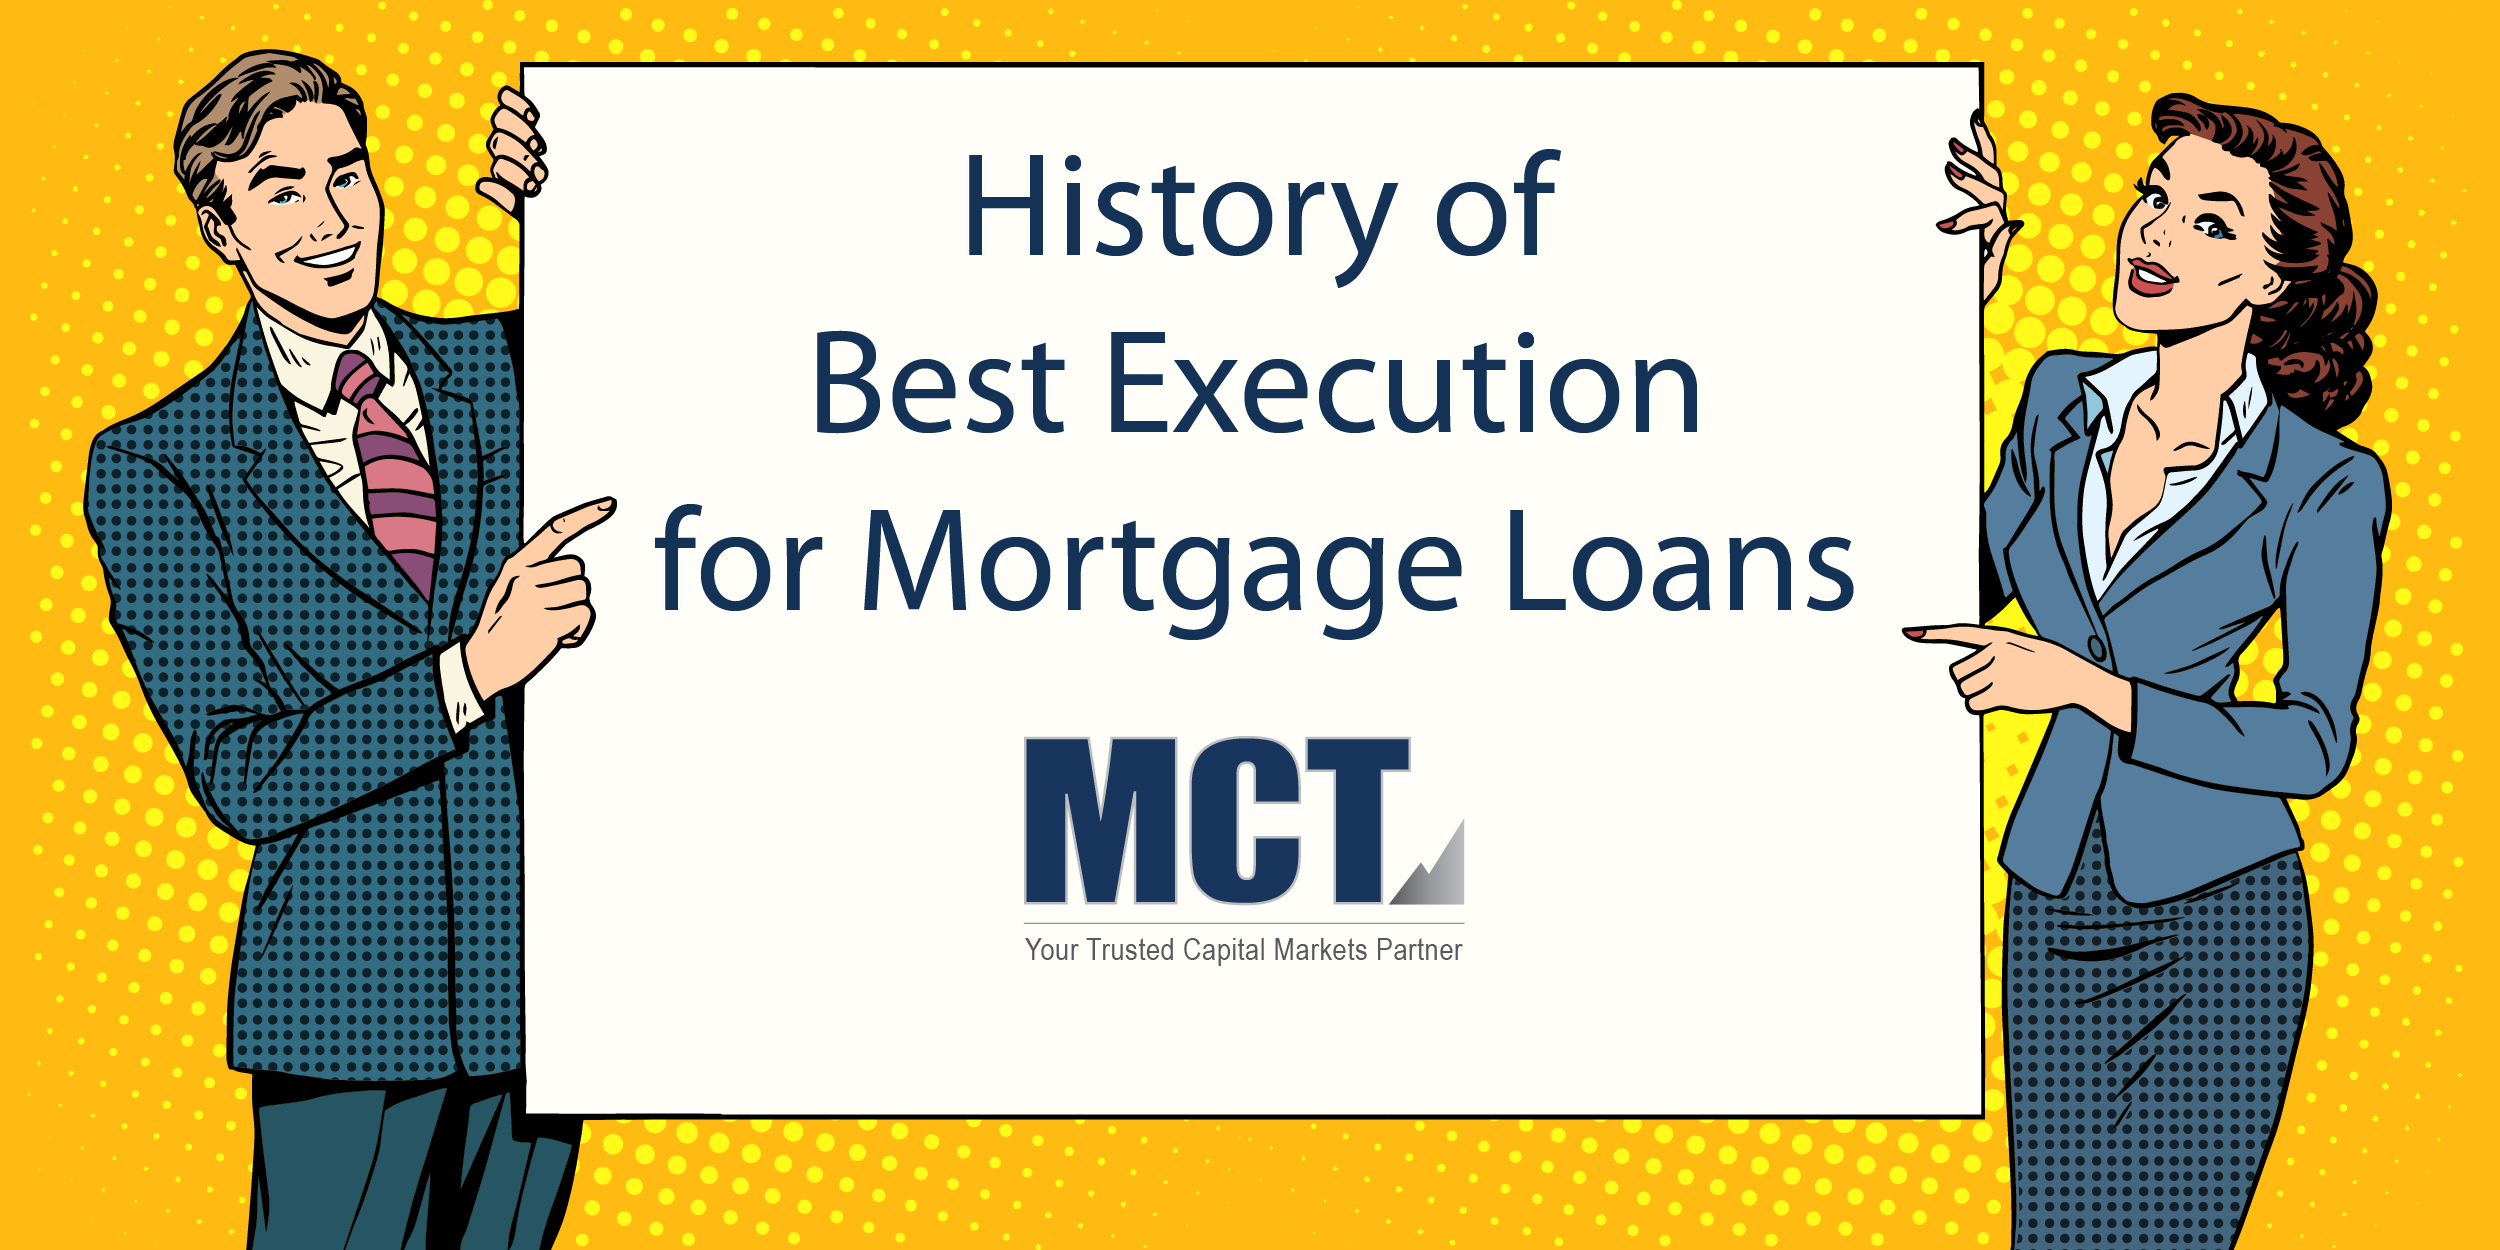 History of Best Execution for Mortgage Loans